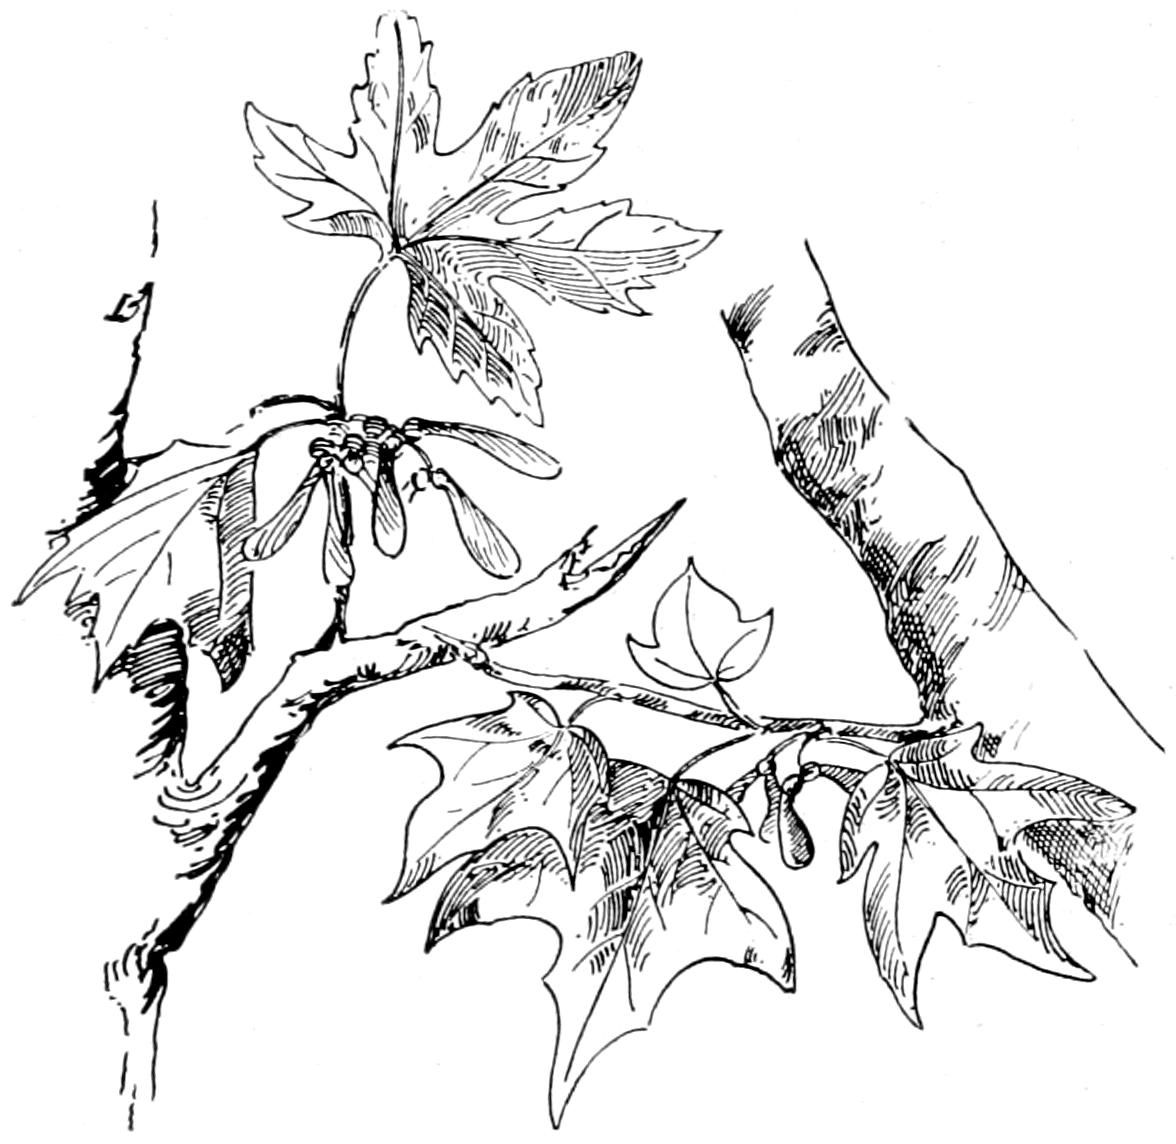 Maple twig, leaves and seed